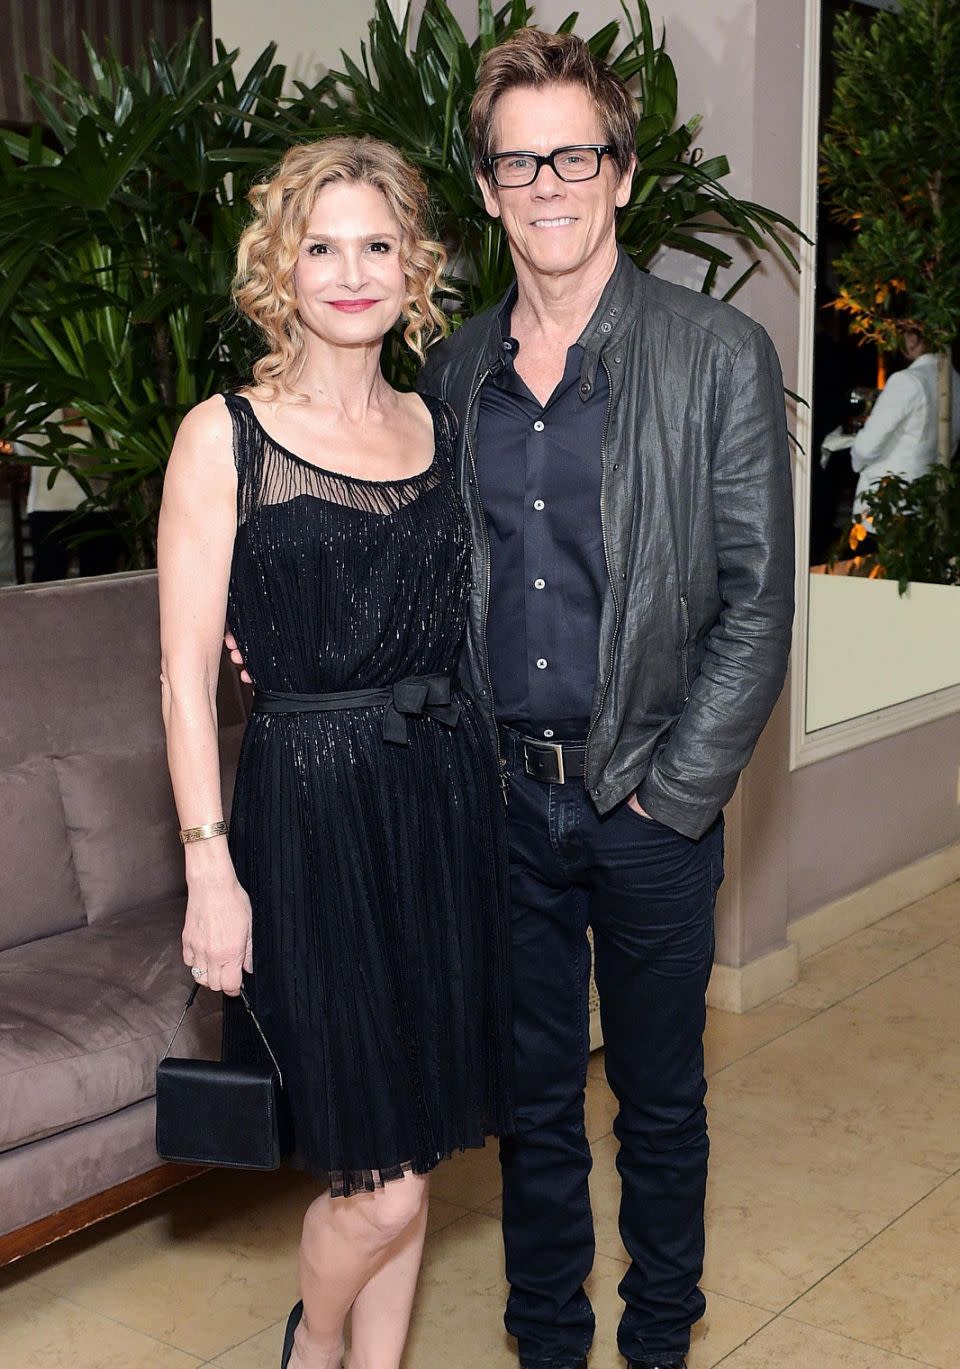 Kevin Bacon and wife Kyra Sedgwick are actually distant cousins! Source: Getty